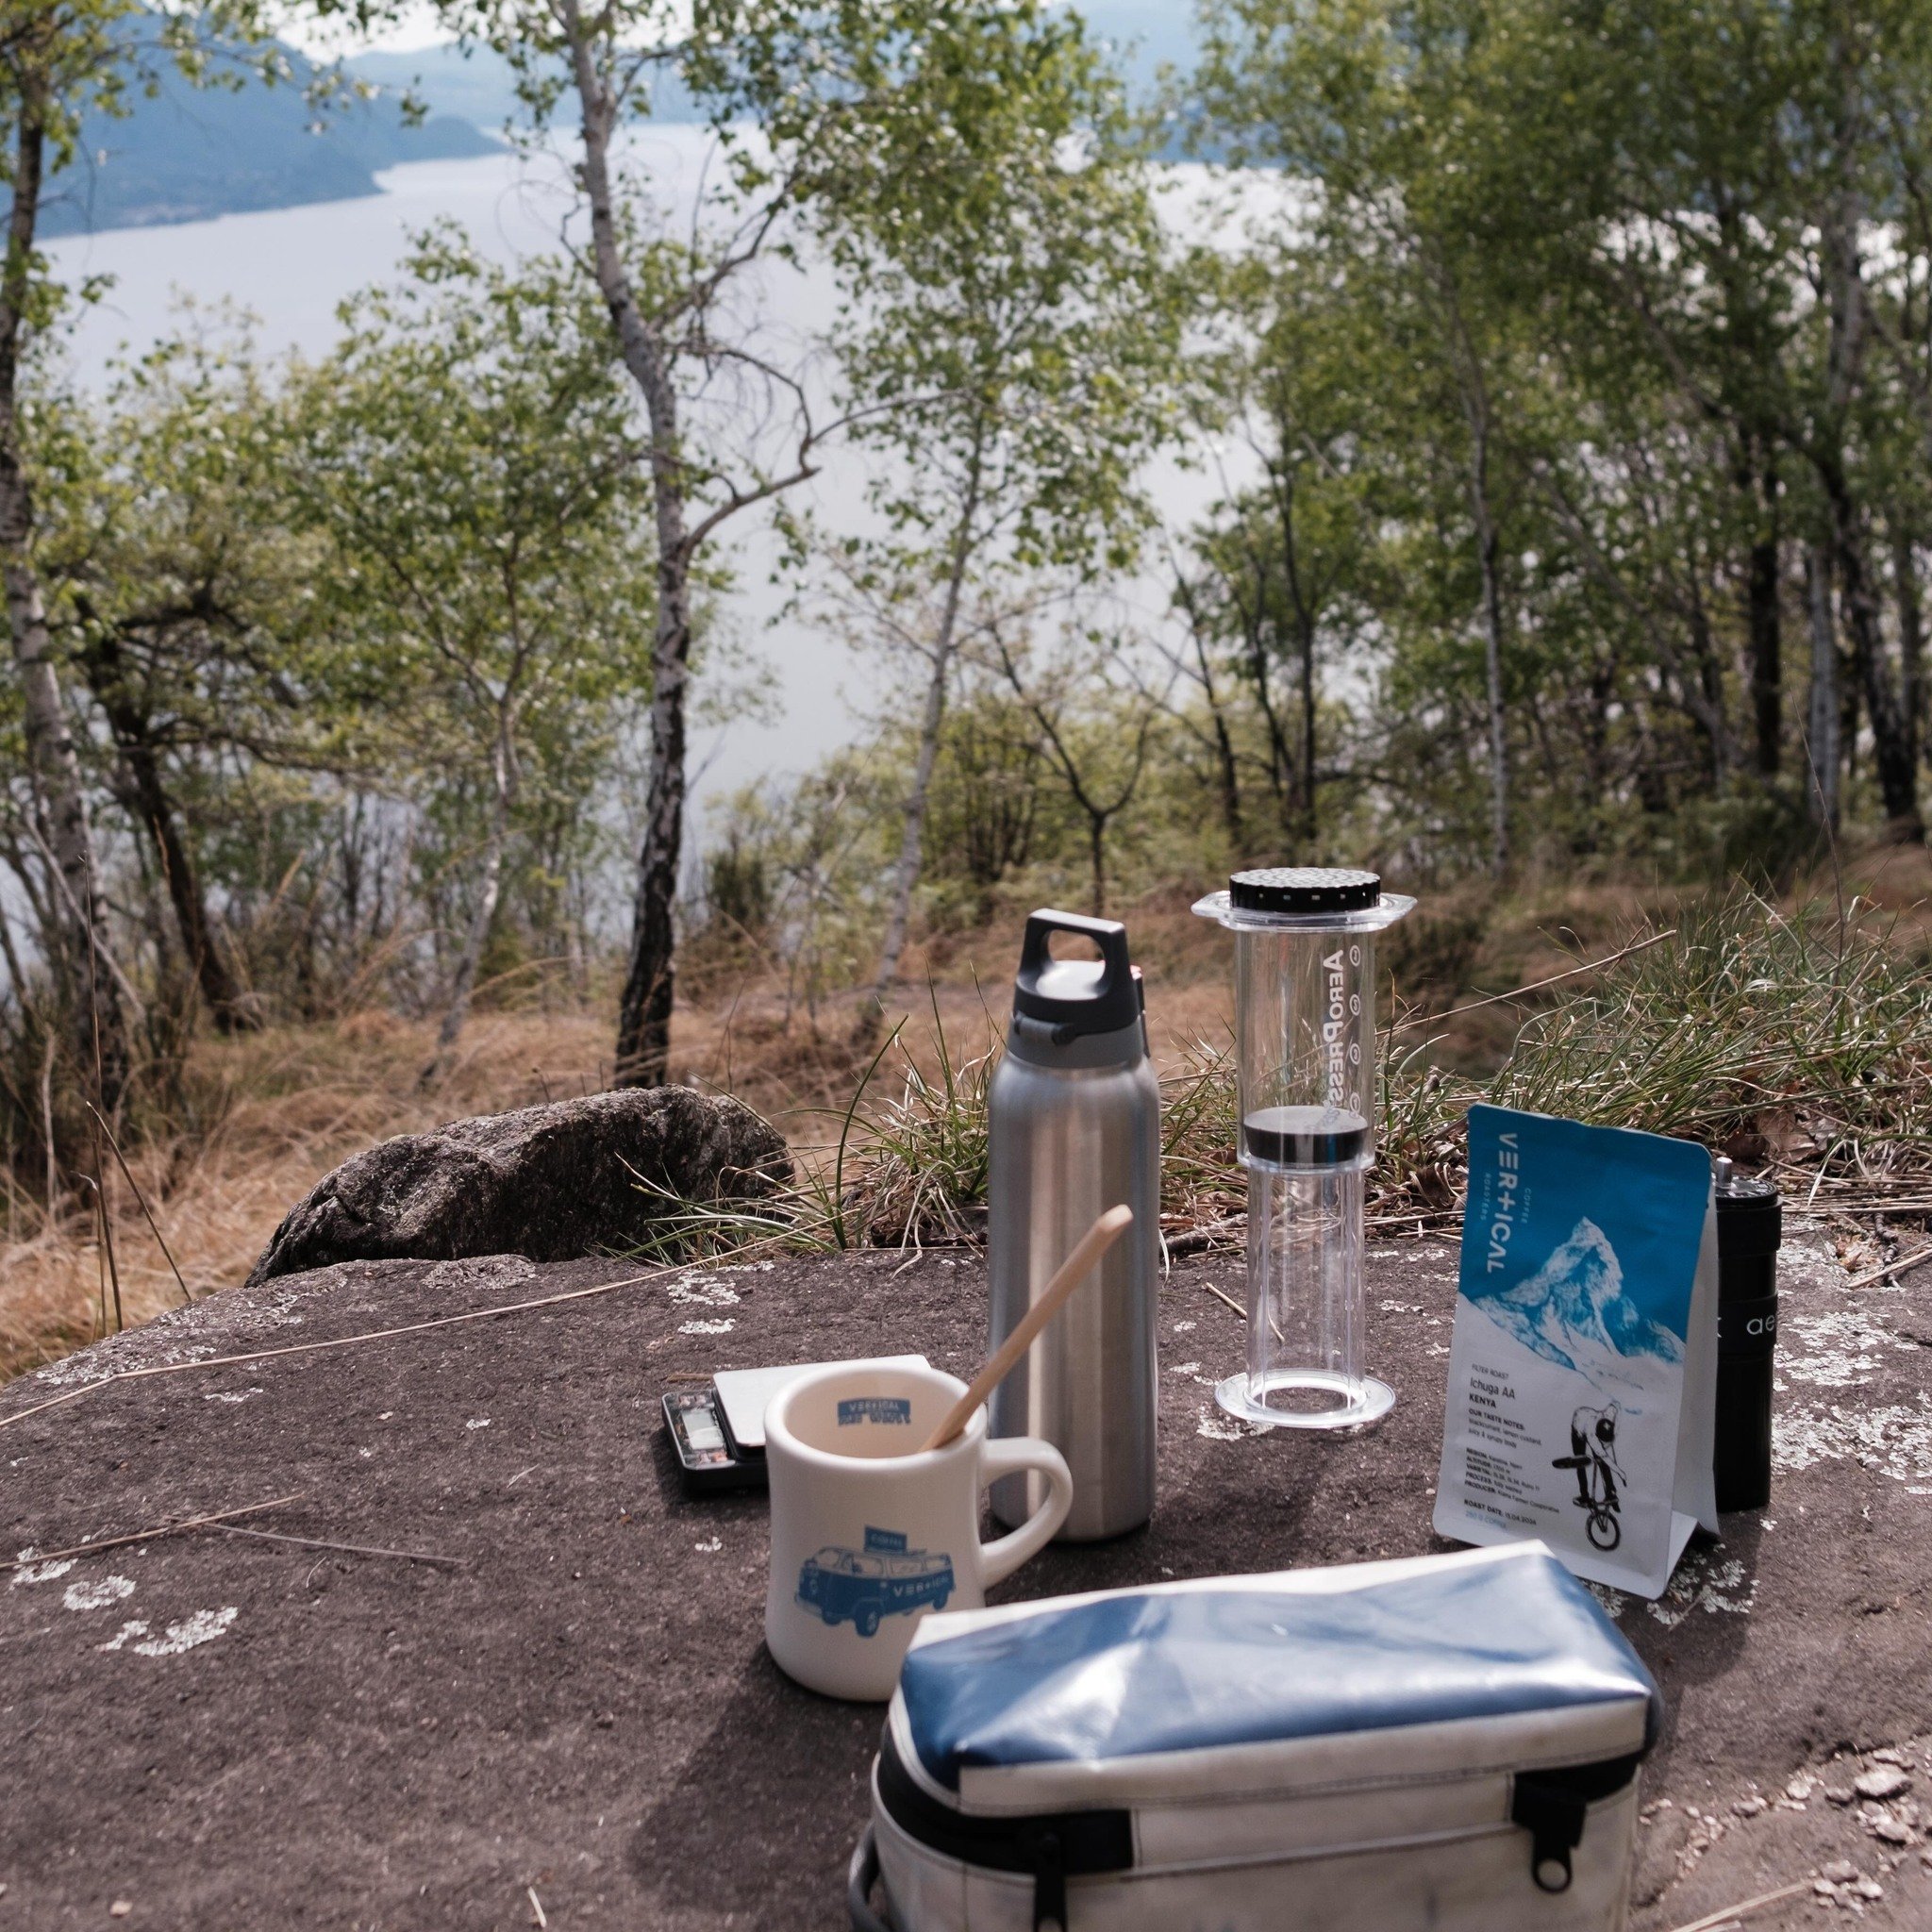 Brew with a view 💙 We love the AeroPress for its simplicity, durability and versatility 💙 but there are many different options for tasty outdoor coffee 💙 Which is your go-to method? 💙 
. 
.
.
#brewwithaview
#outdoorcoffee
#outsideisthebestside
#a